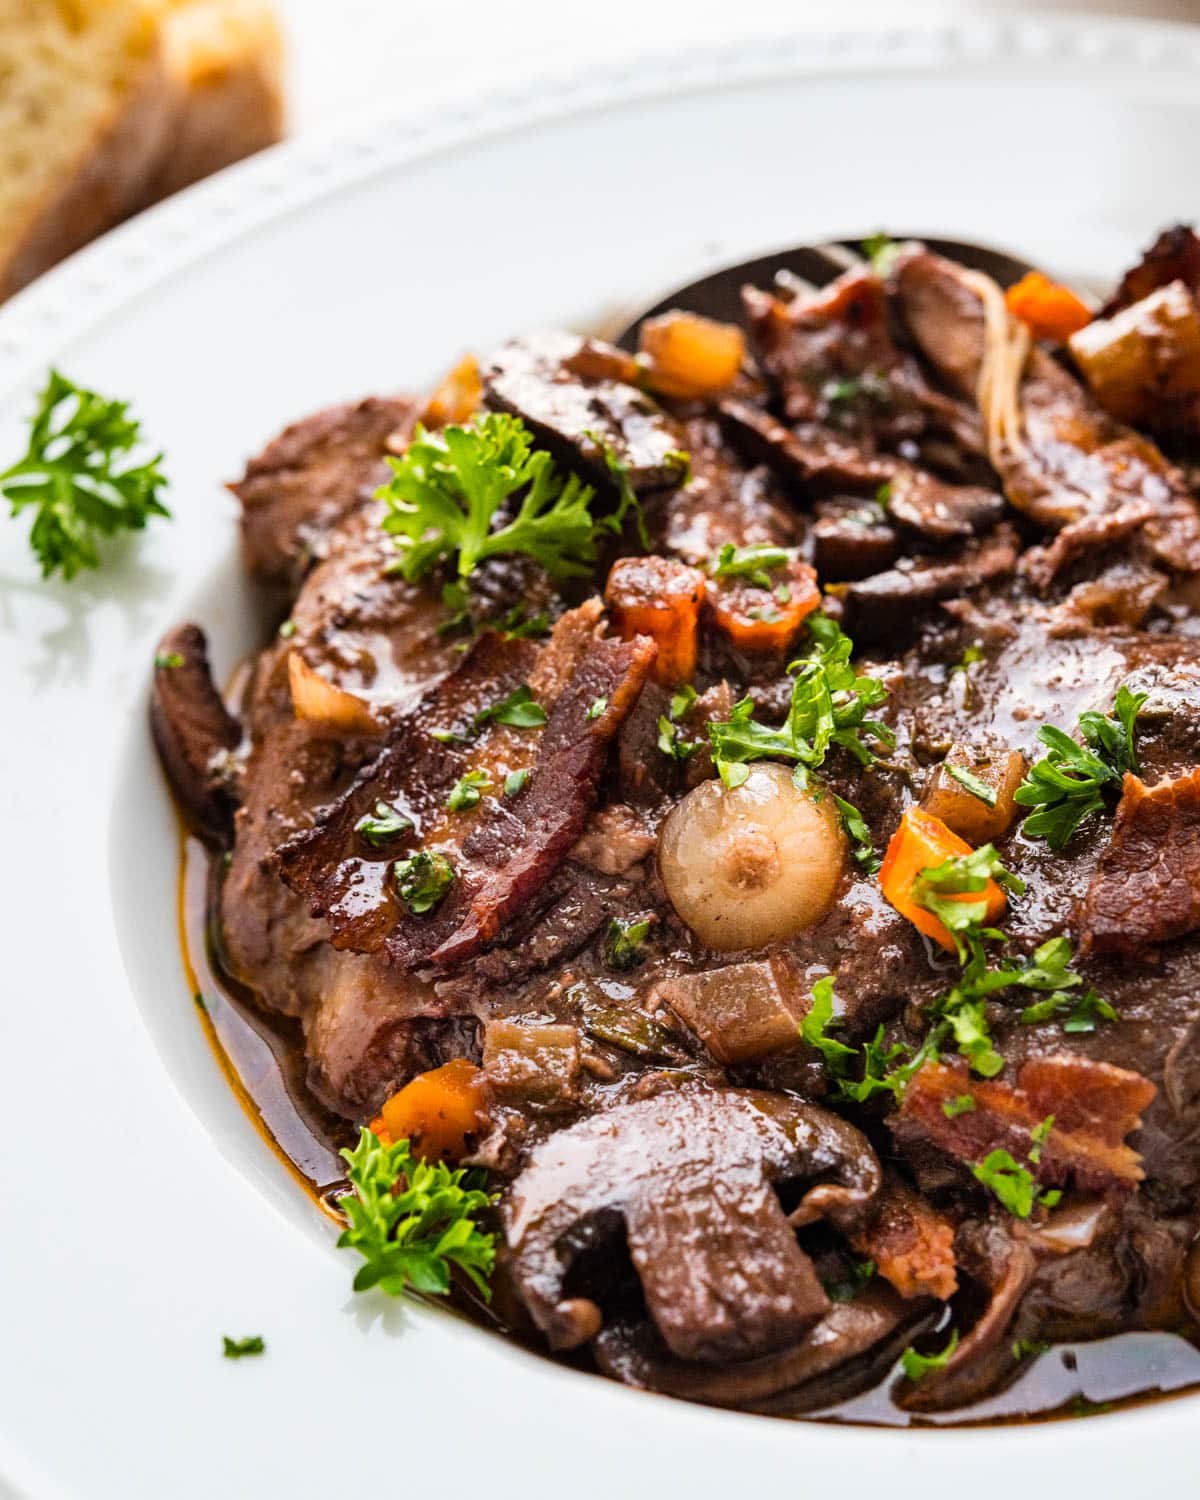 A dish of coq au vin with pearl onions and bacon.